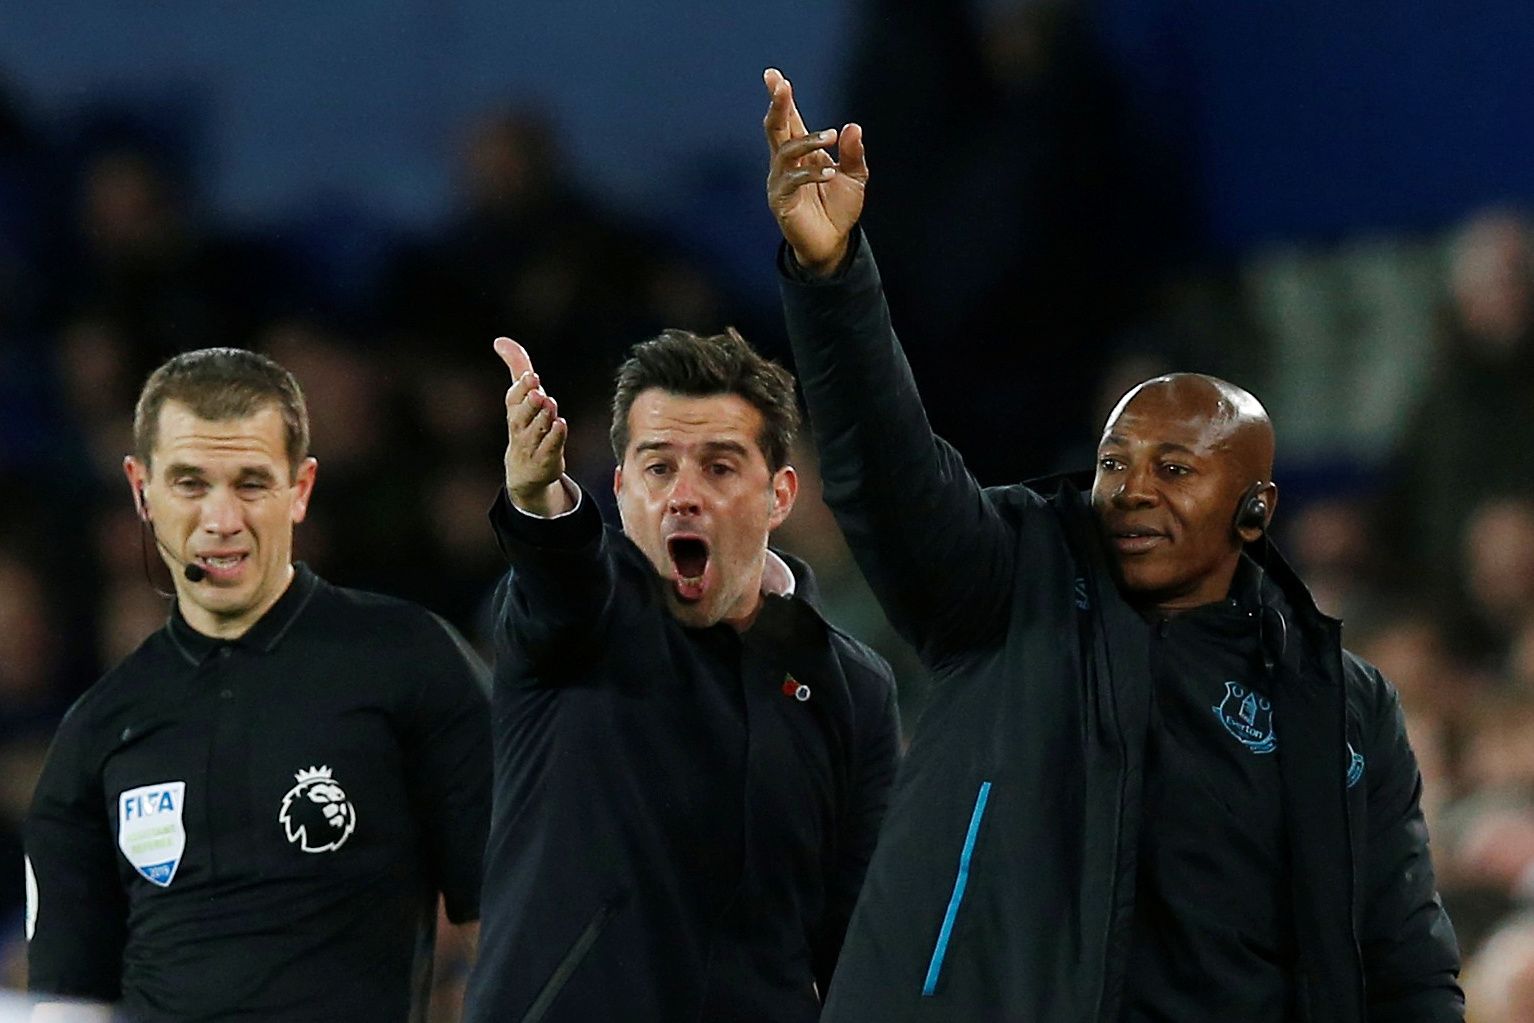 Soccer Football - Premier League - Everton v Tottenham Hotspur - Goodison Park, Liverpool, Britain - November 3, 2019  Everton manager Marco Silva and assistant manager Luis Boa Morte react  REUTERS/Andrew Yates  EDITORIAL USE ONLY. No use with unauthorized audio, video, data, fixture lists, club/league logos or 